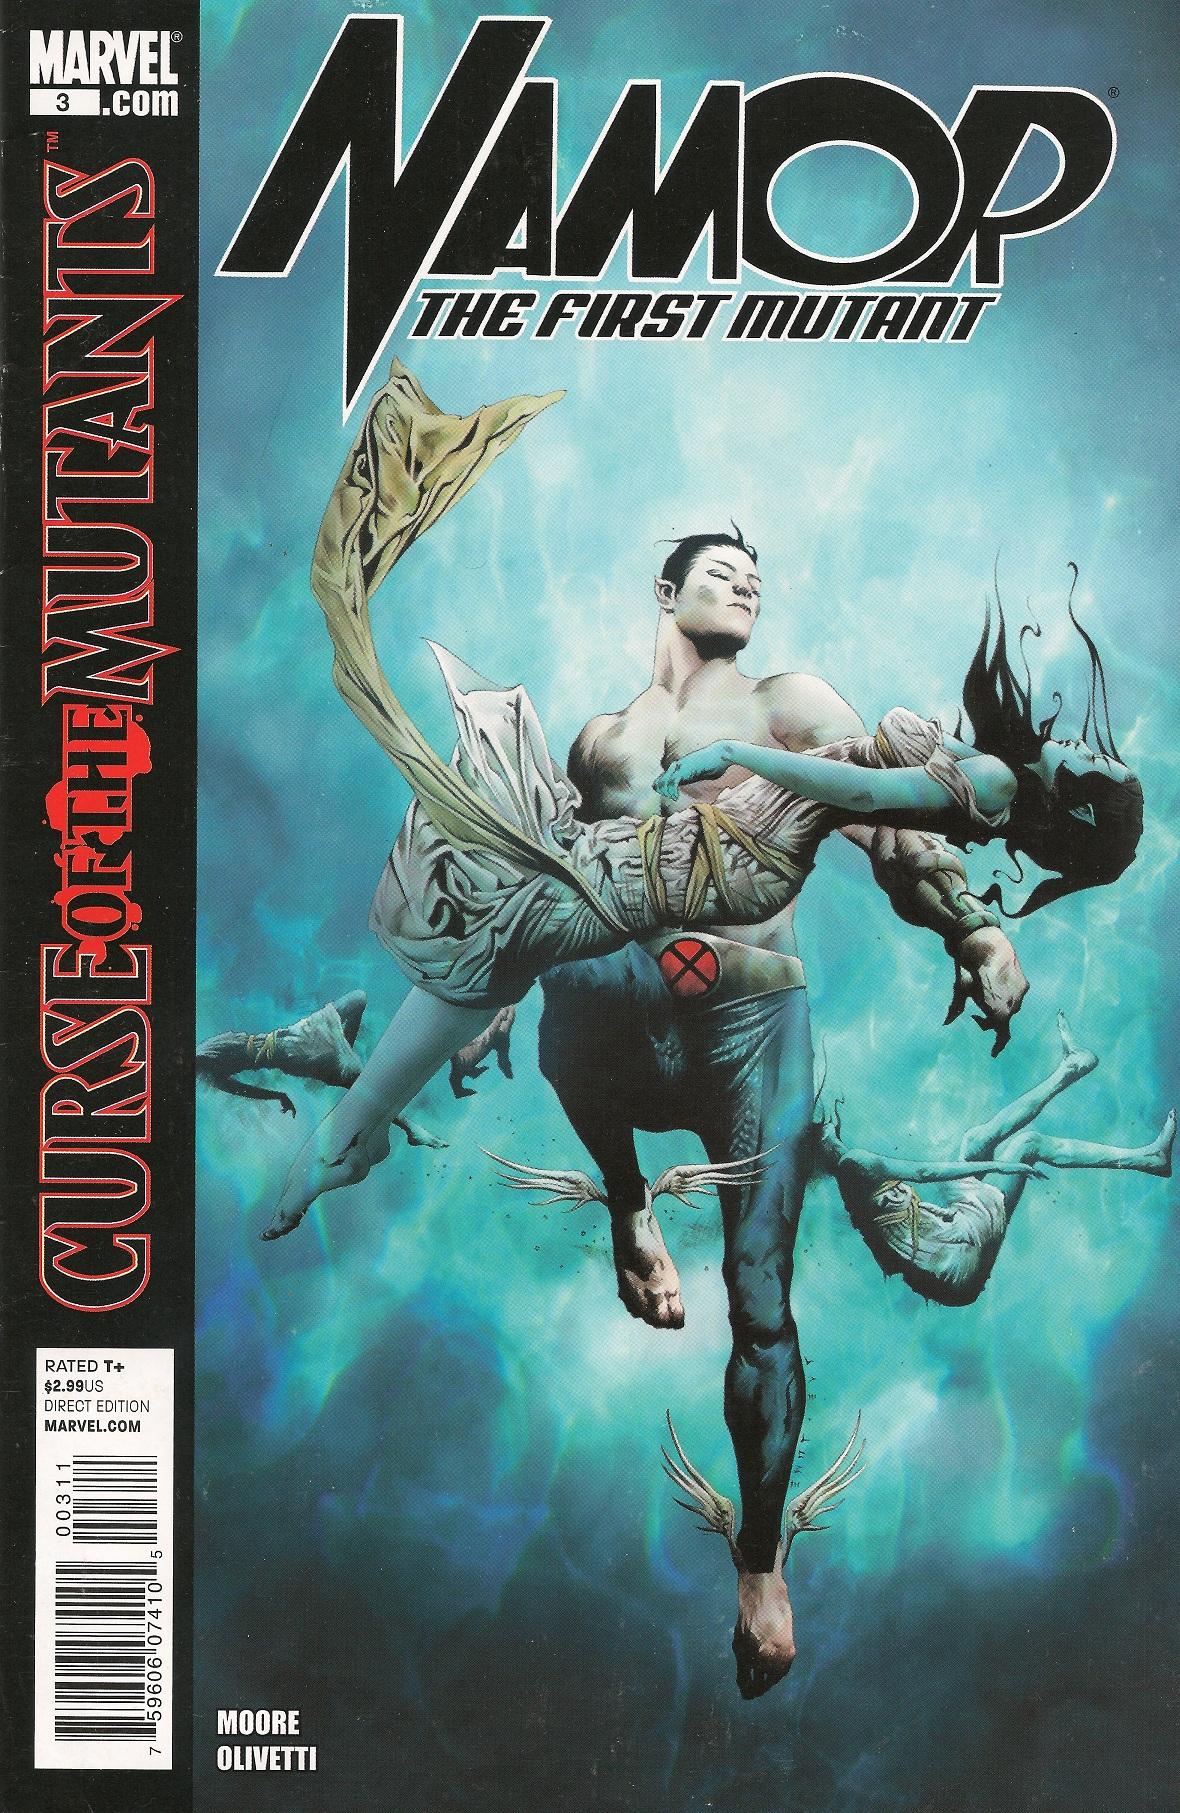 Namor: The First Mutant Vol. 1 #3